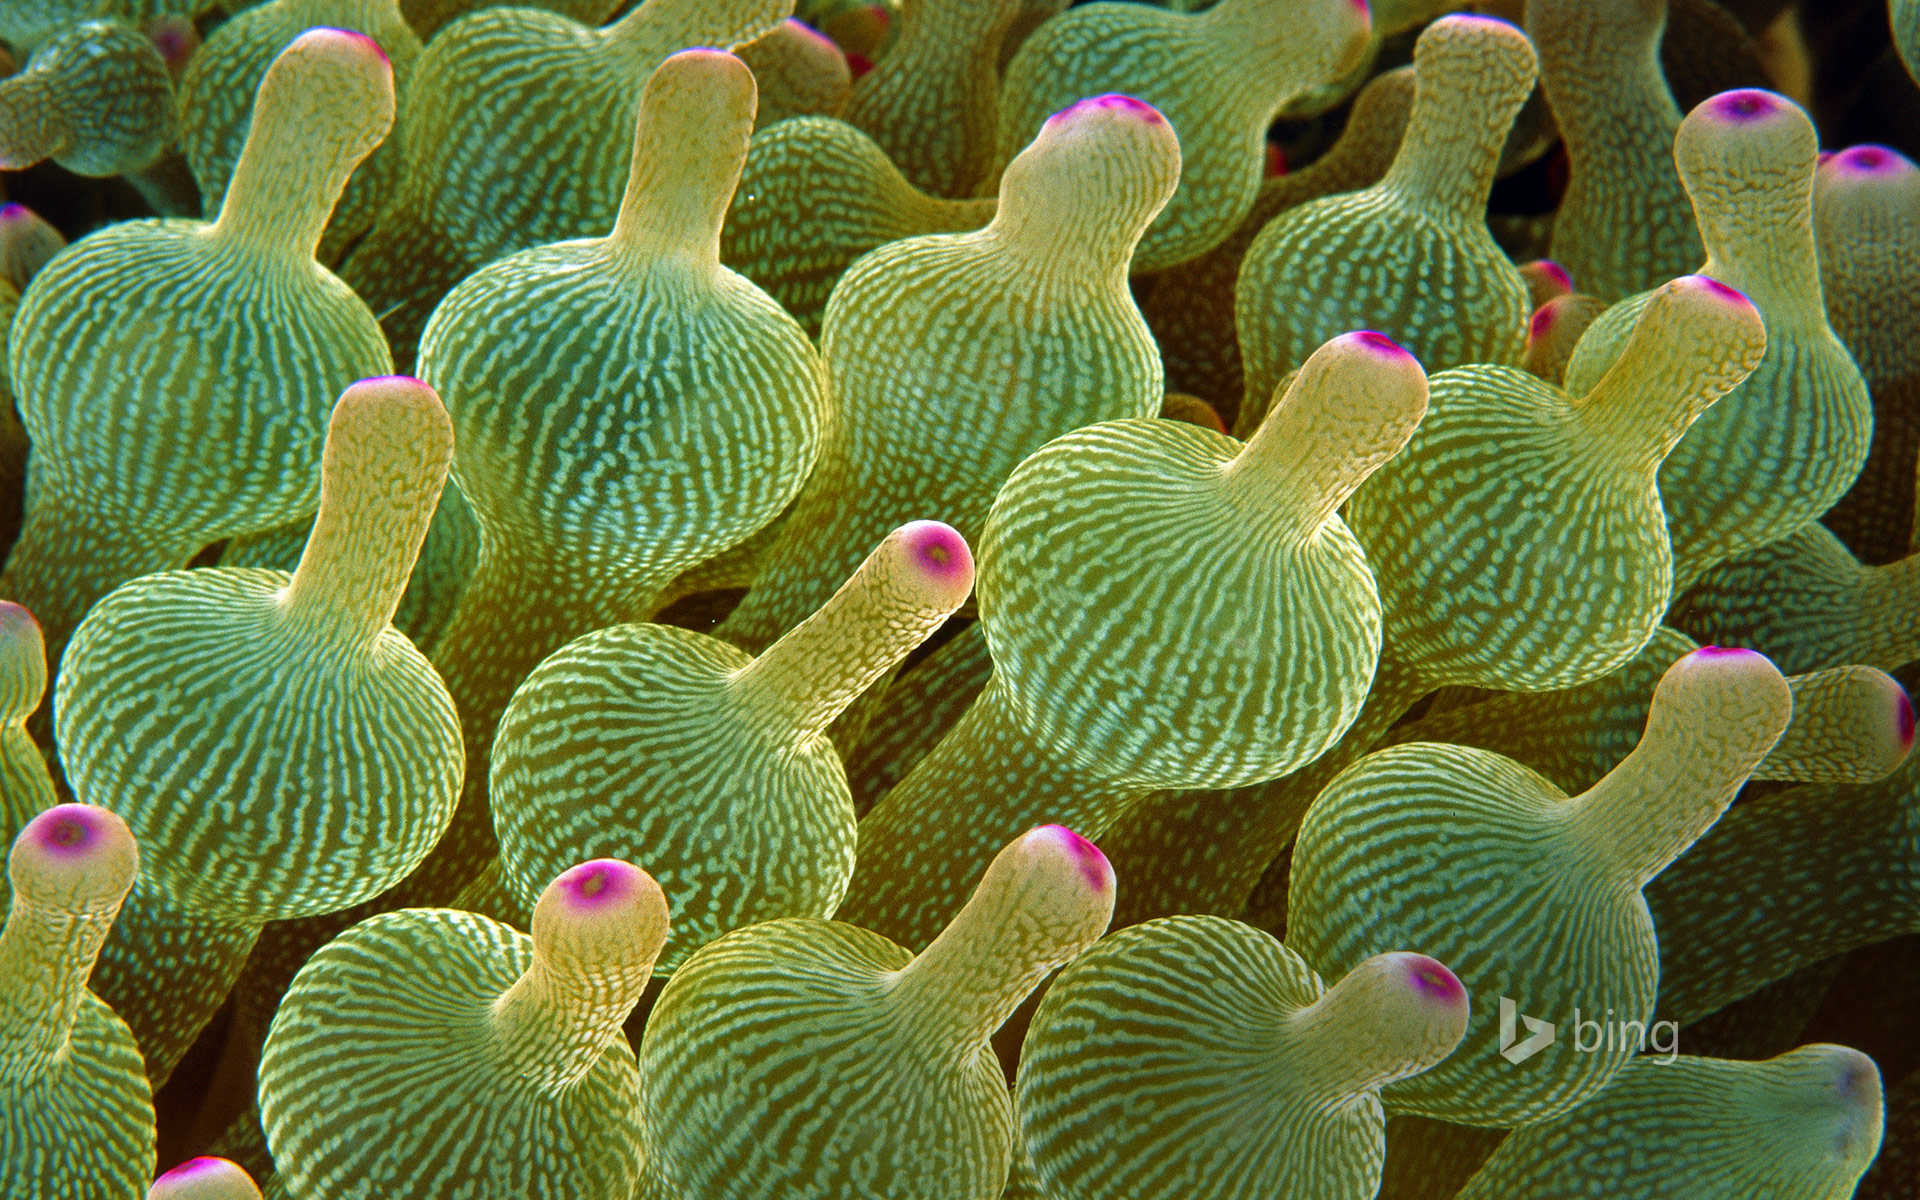 Bubble-tip sea anemone in the Great Barrier Reef